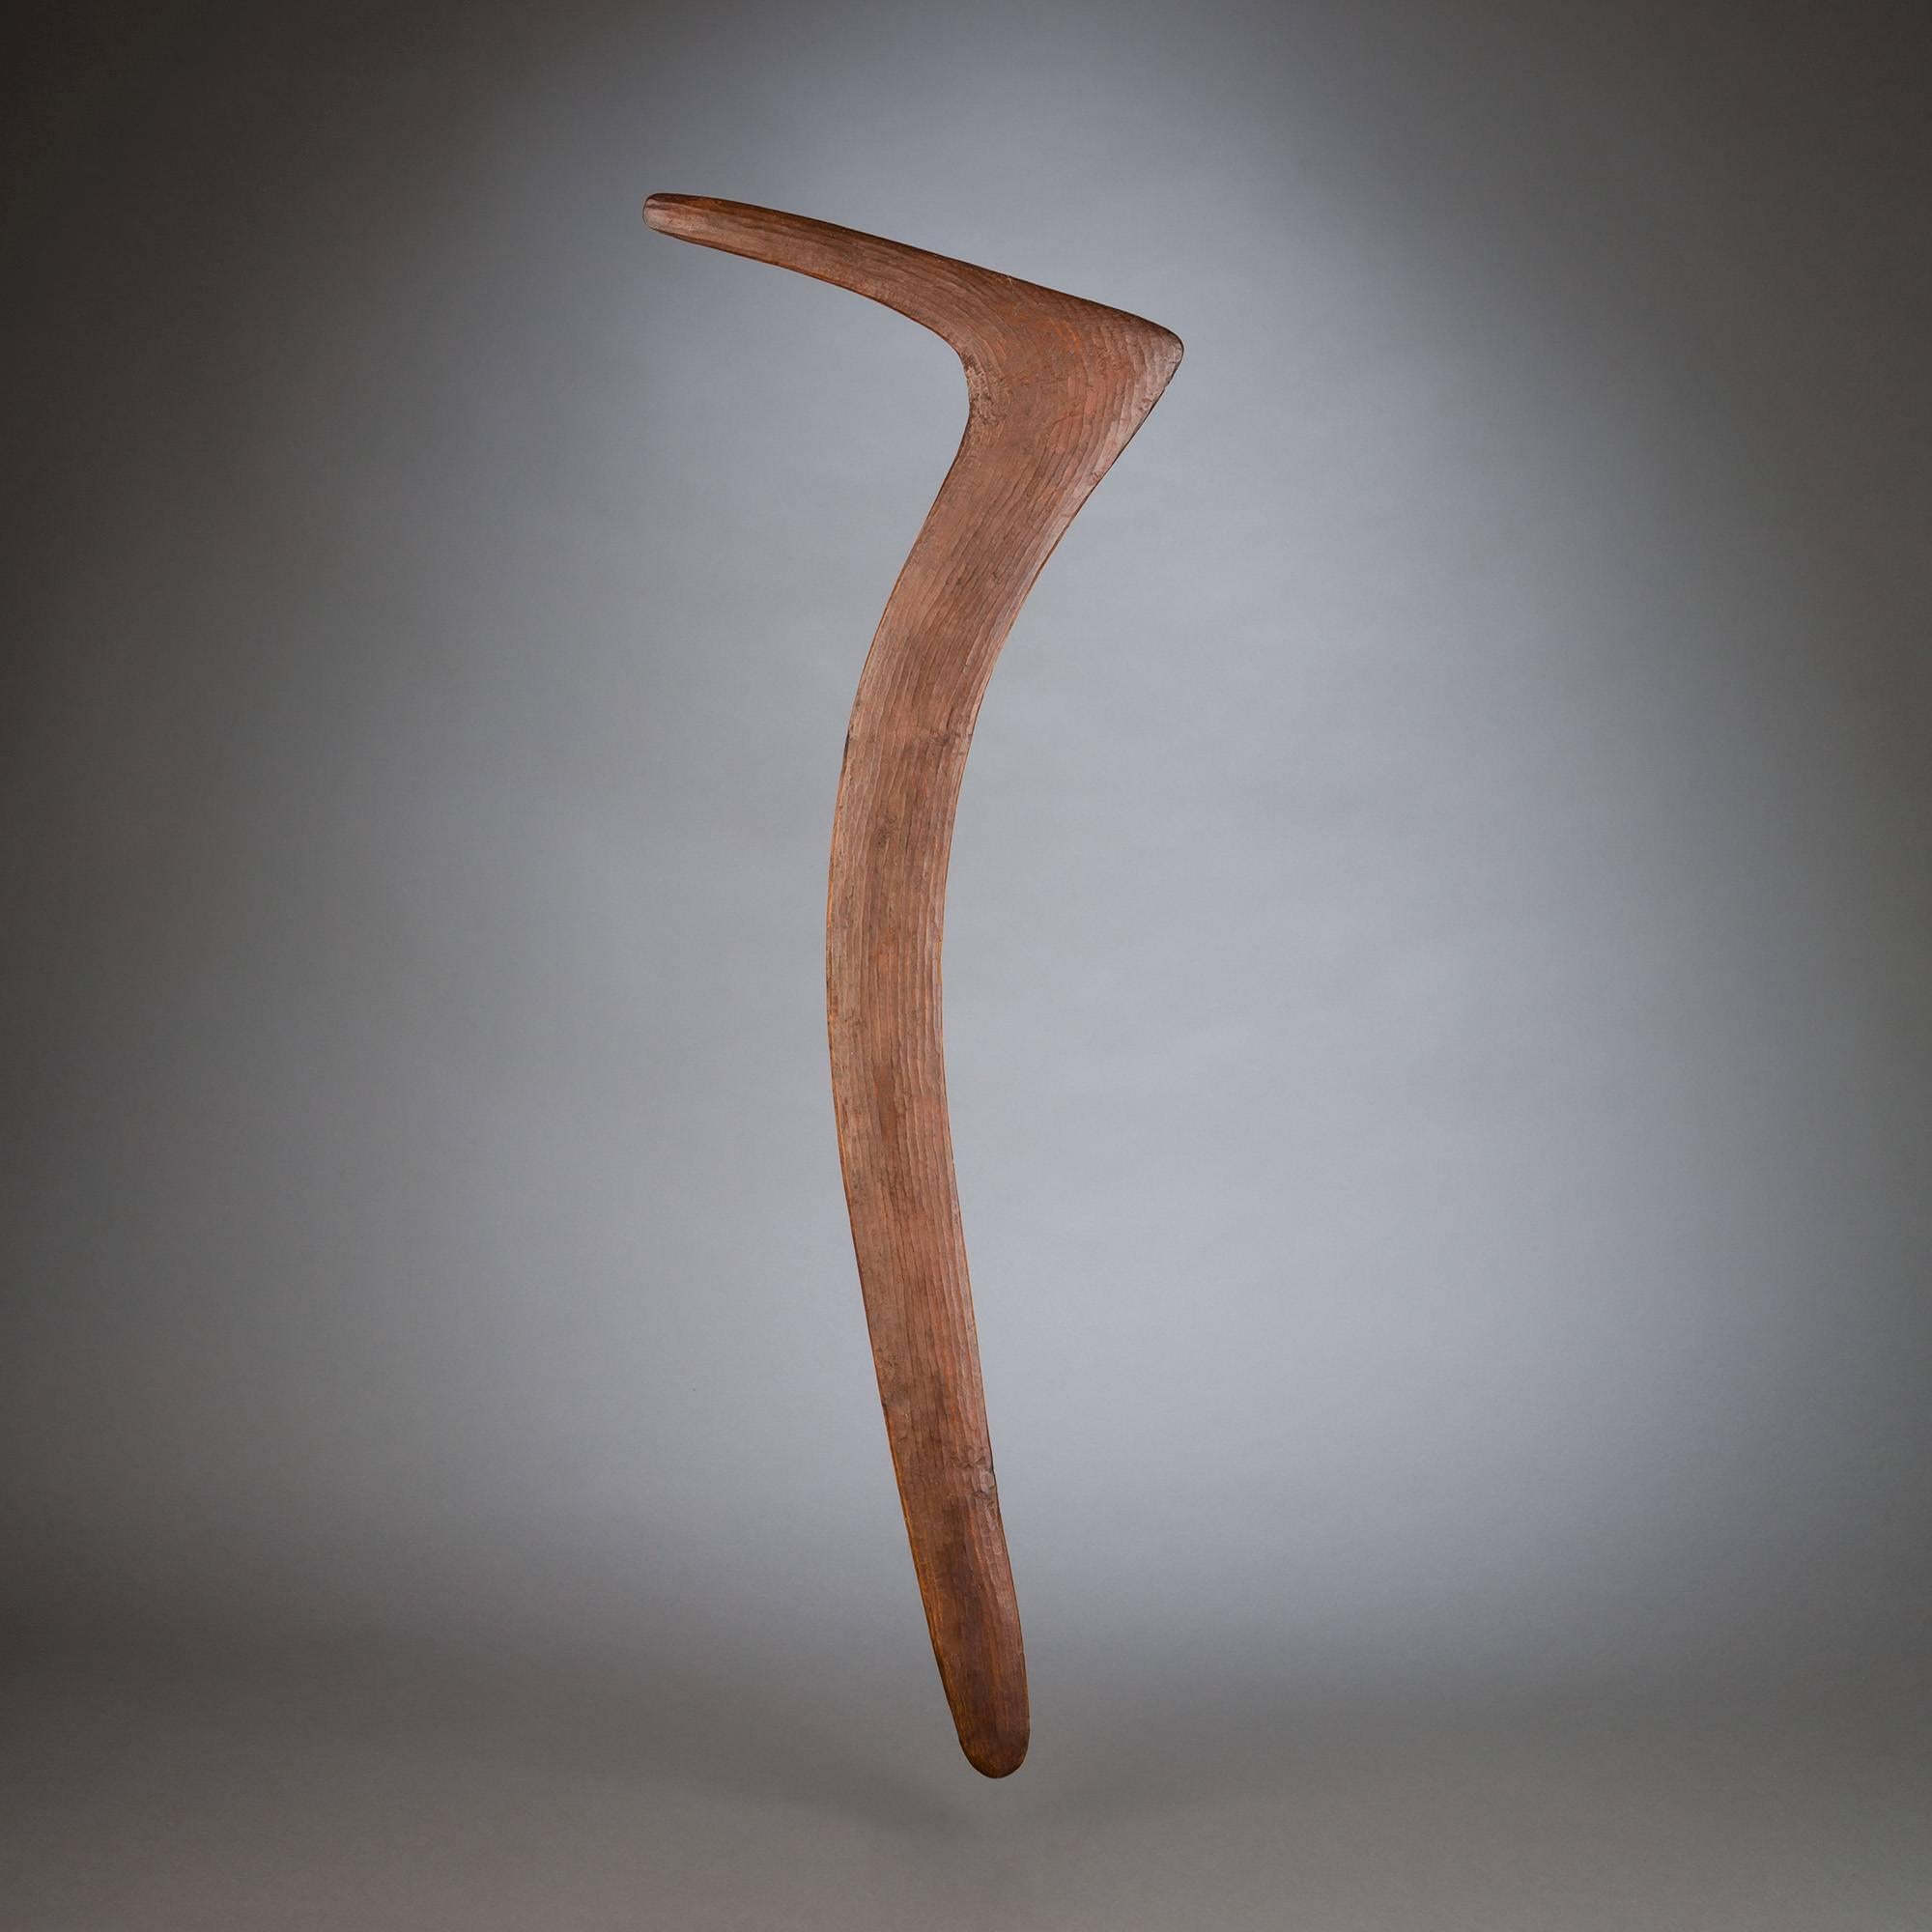 A lovely, elegantly carved hardwood boomerang. With its pointed arc silhouette, the weapon almost seems to depict an abstract avian form. Subtle striations run the length of the stick, beautifying its warm surface and drawing in the eye at close